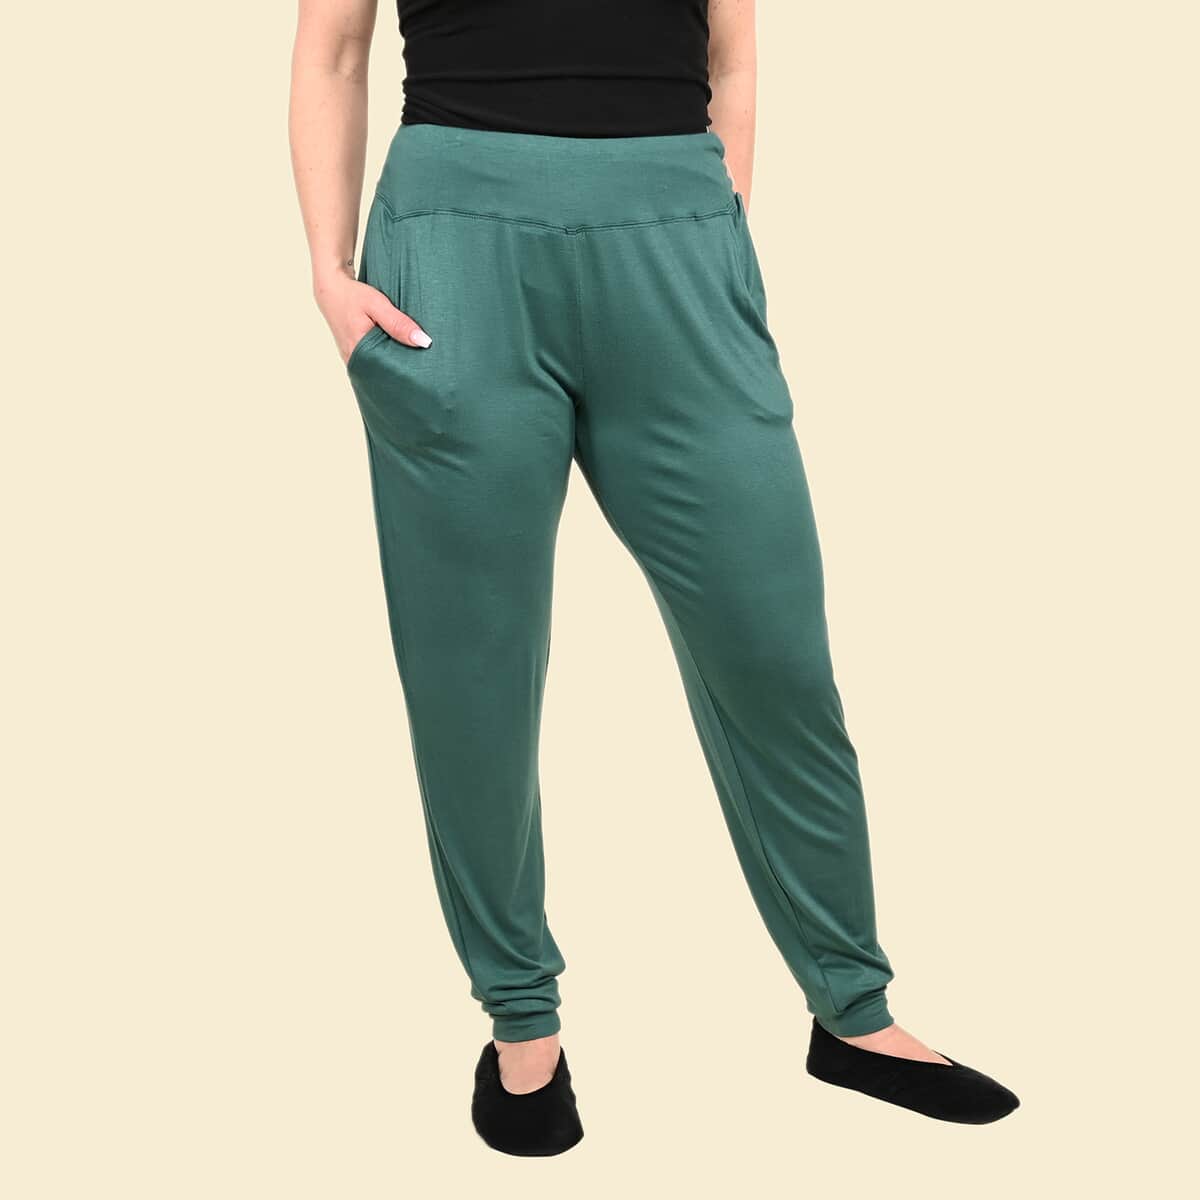 Tamsy Turquoise Jogger Pant with Pockets - 2X image number 0